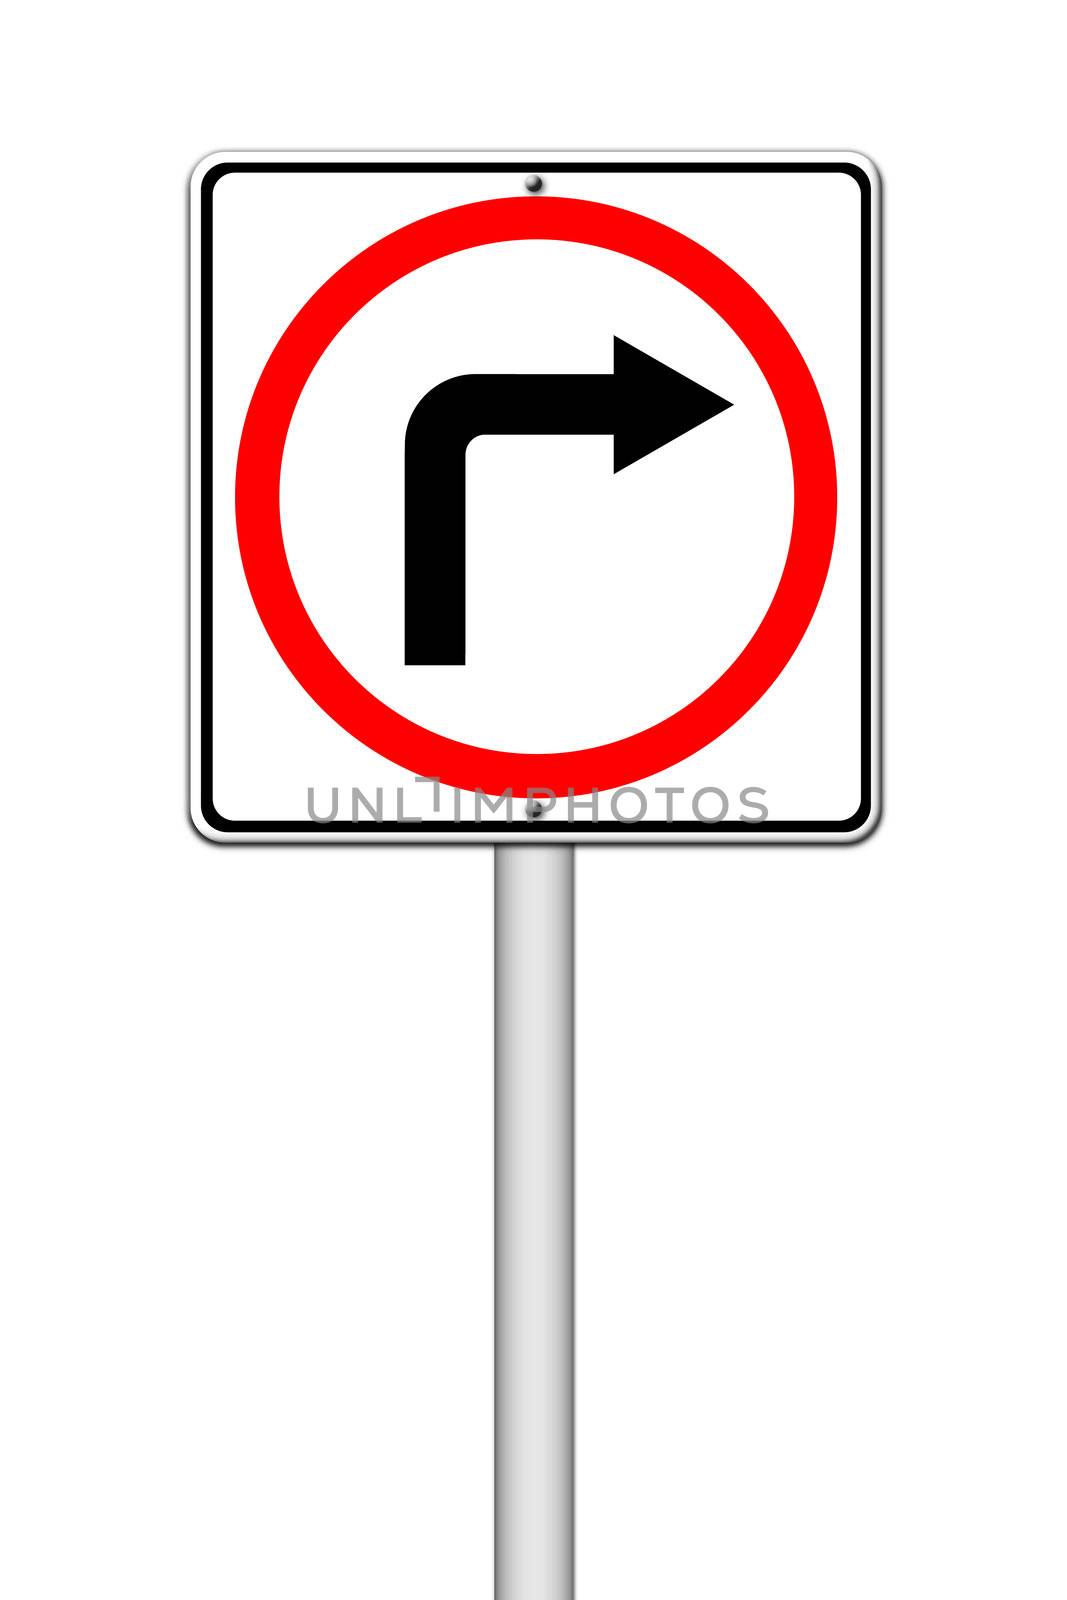 Traffic sign show the turn right on white background